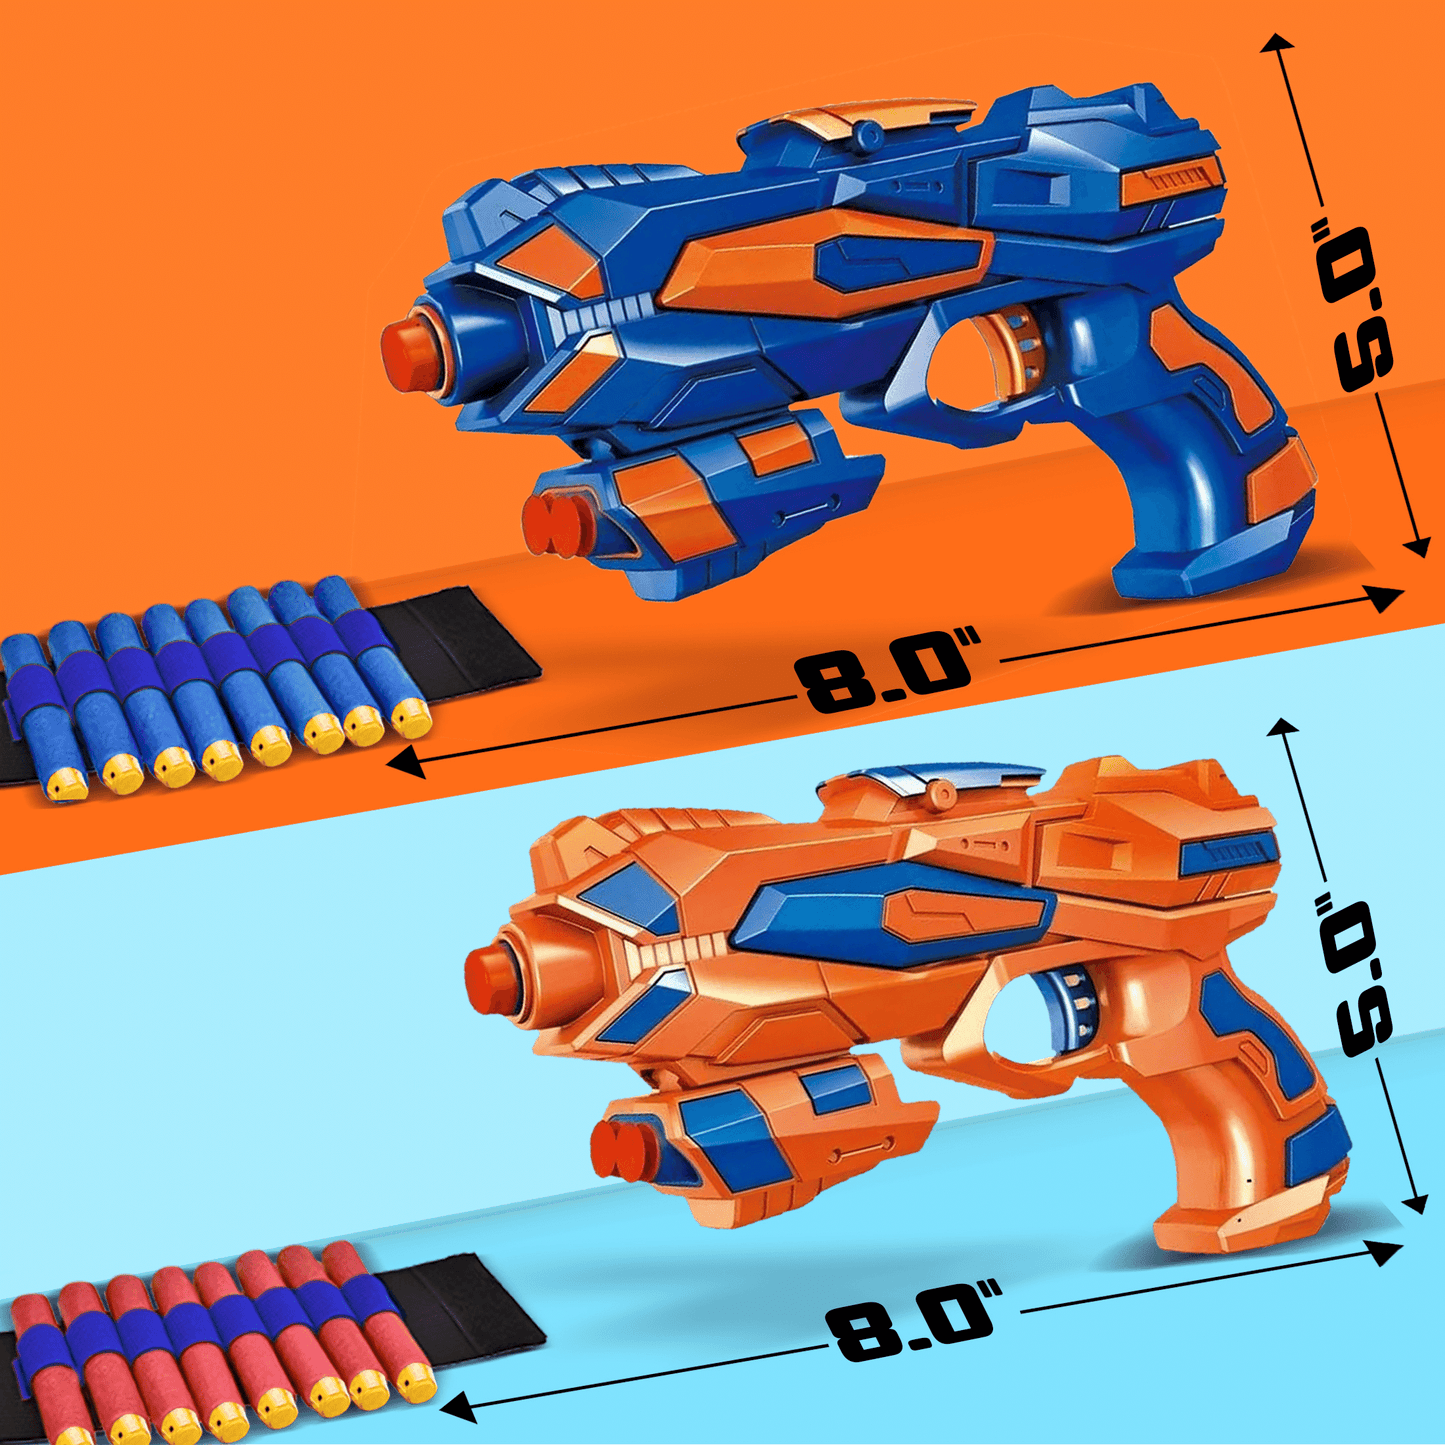 JoyX blue and orange blaster guns with size dimensions and foam dart cartridges against an orange background.